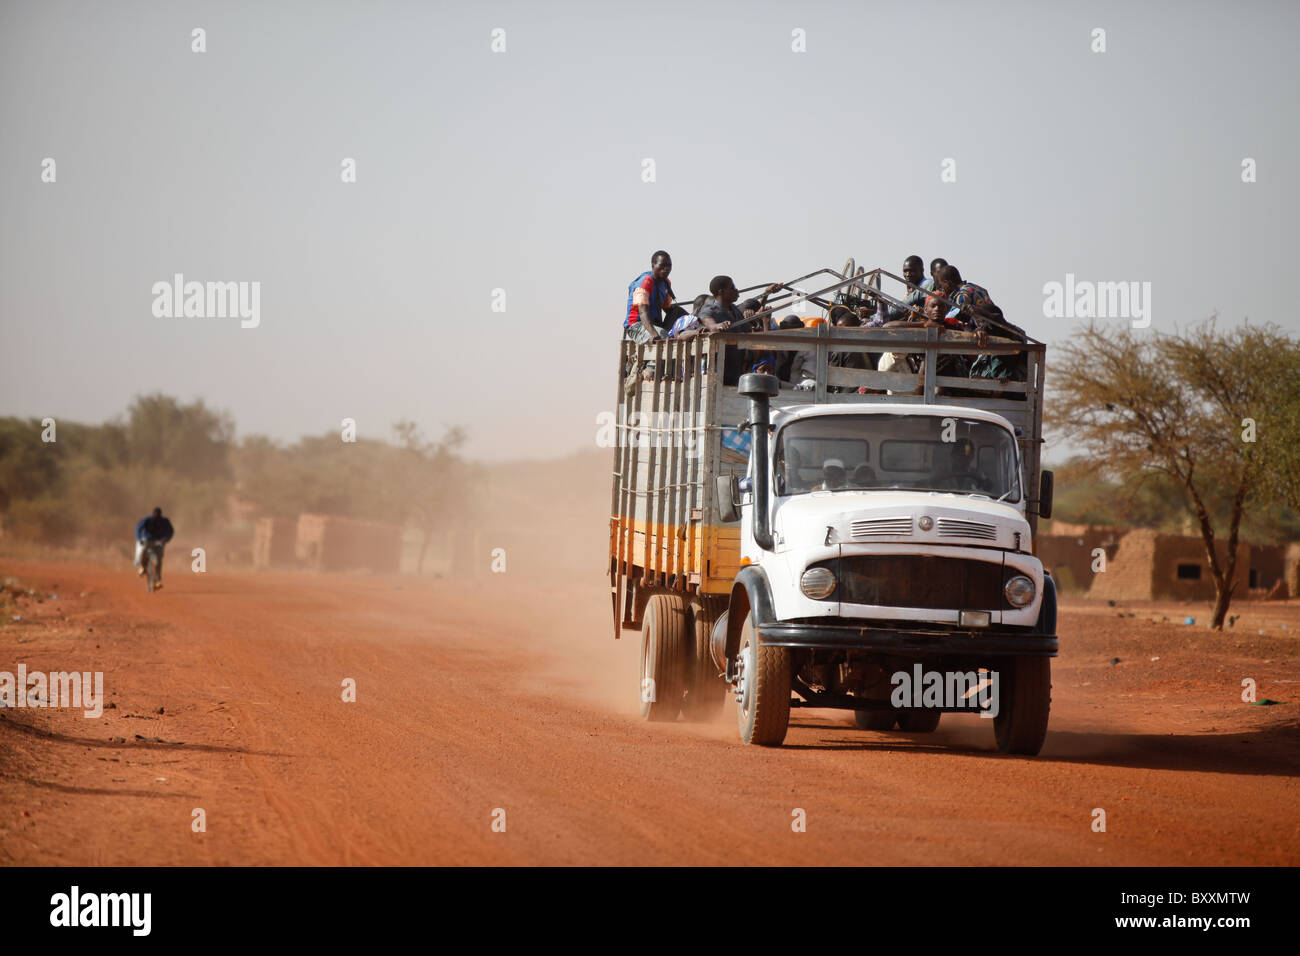 In remote areas of northern Burkina Faso, trucks provide a form of transportation. Stock Photo